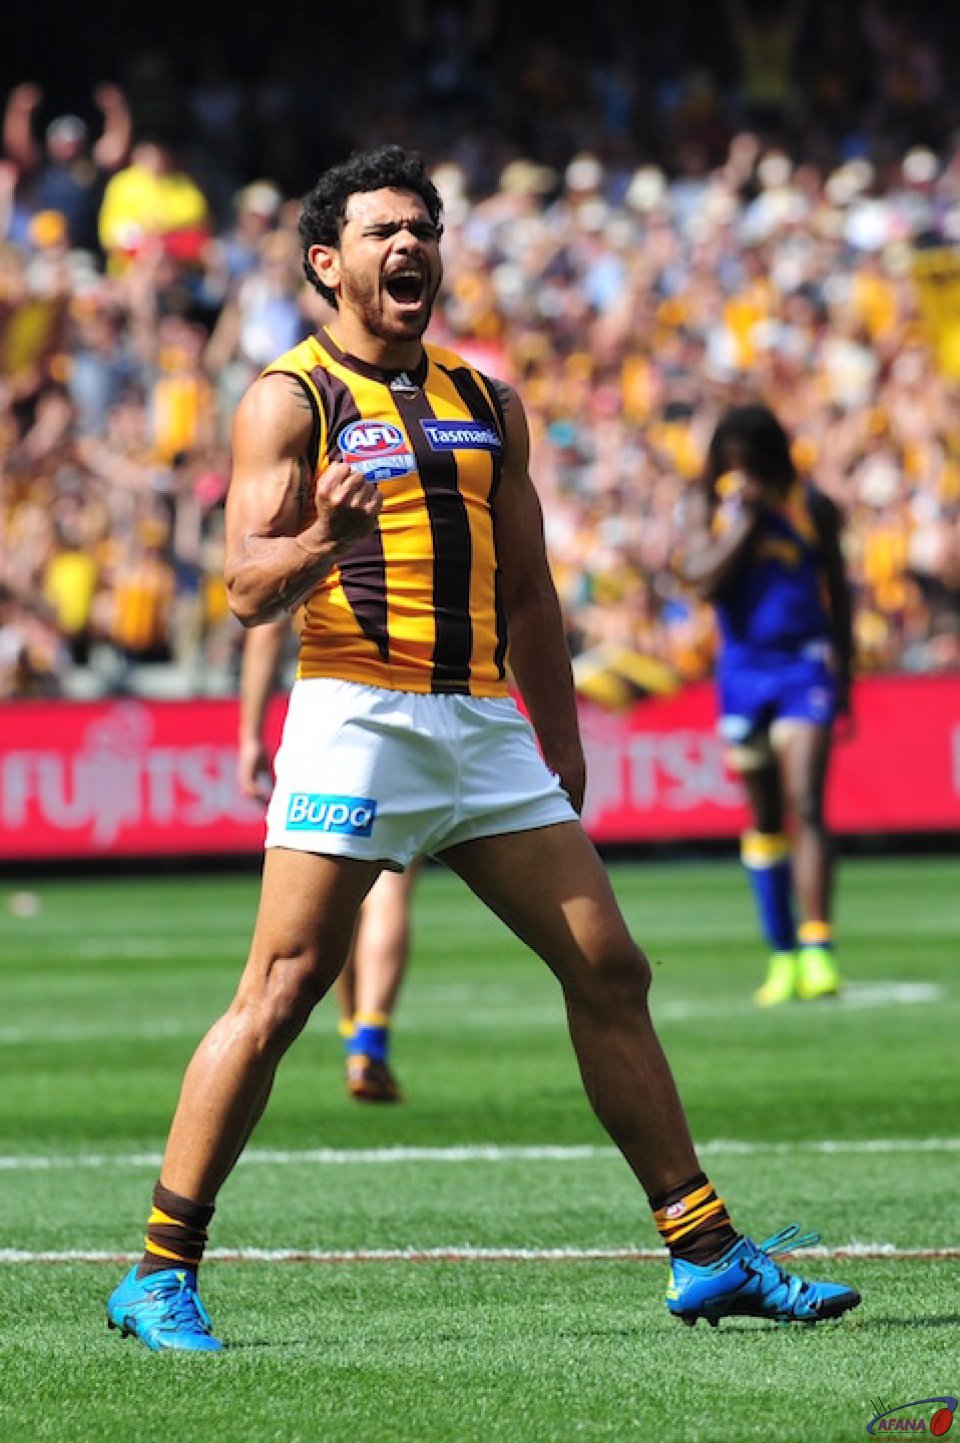 Rioli bags another goal